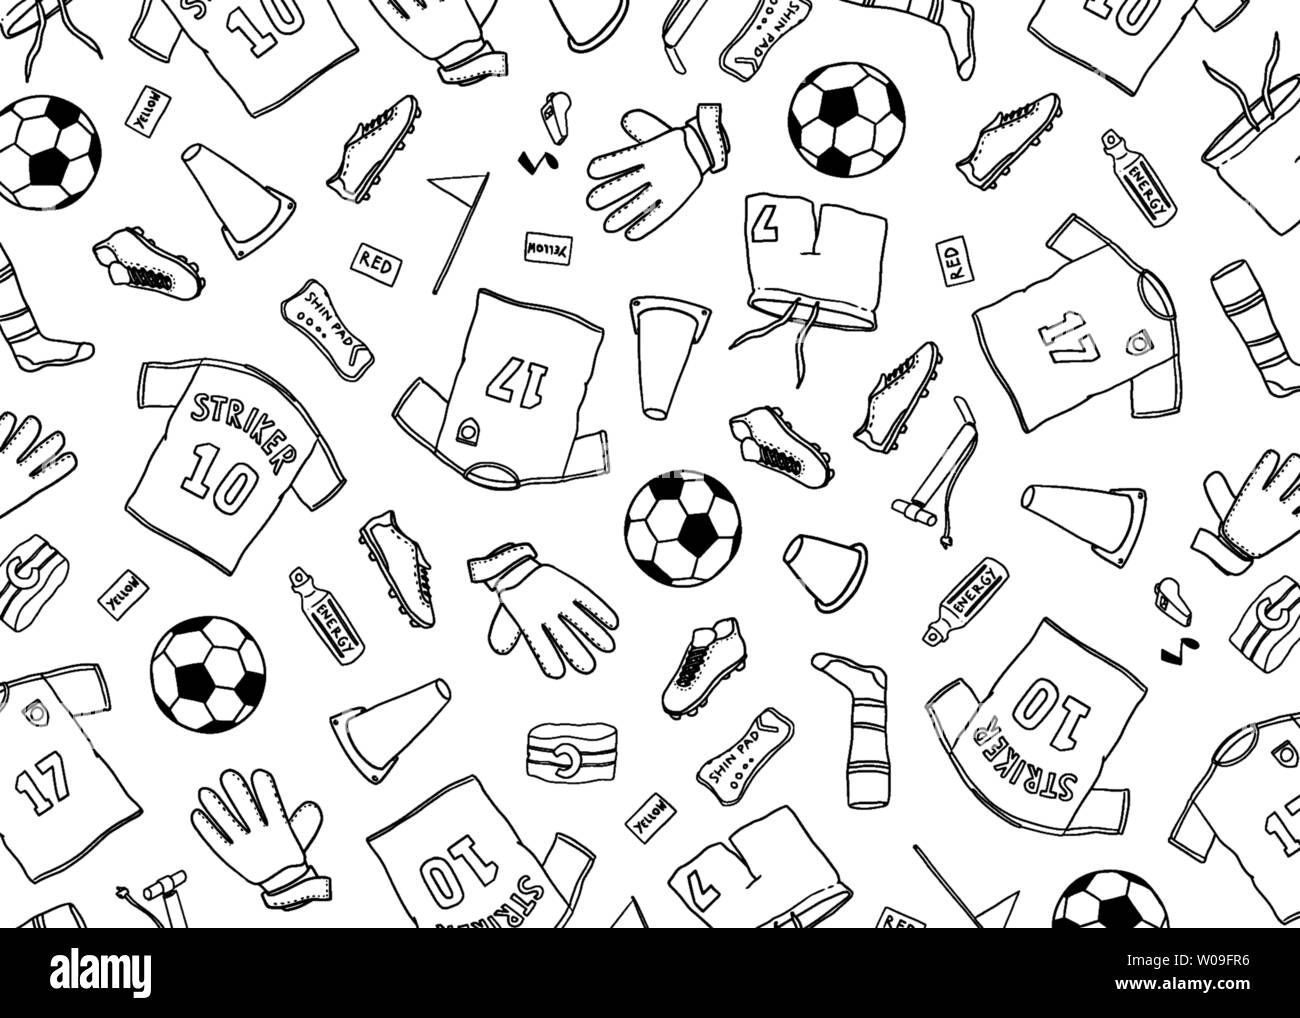 Football Soccer background doodle pattern. Vector illustration background. For print, textile, web, home decor, fashion, surface, graphic design Stock Vector